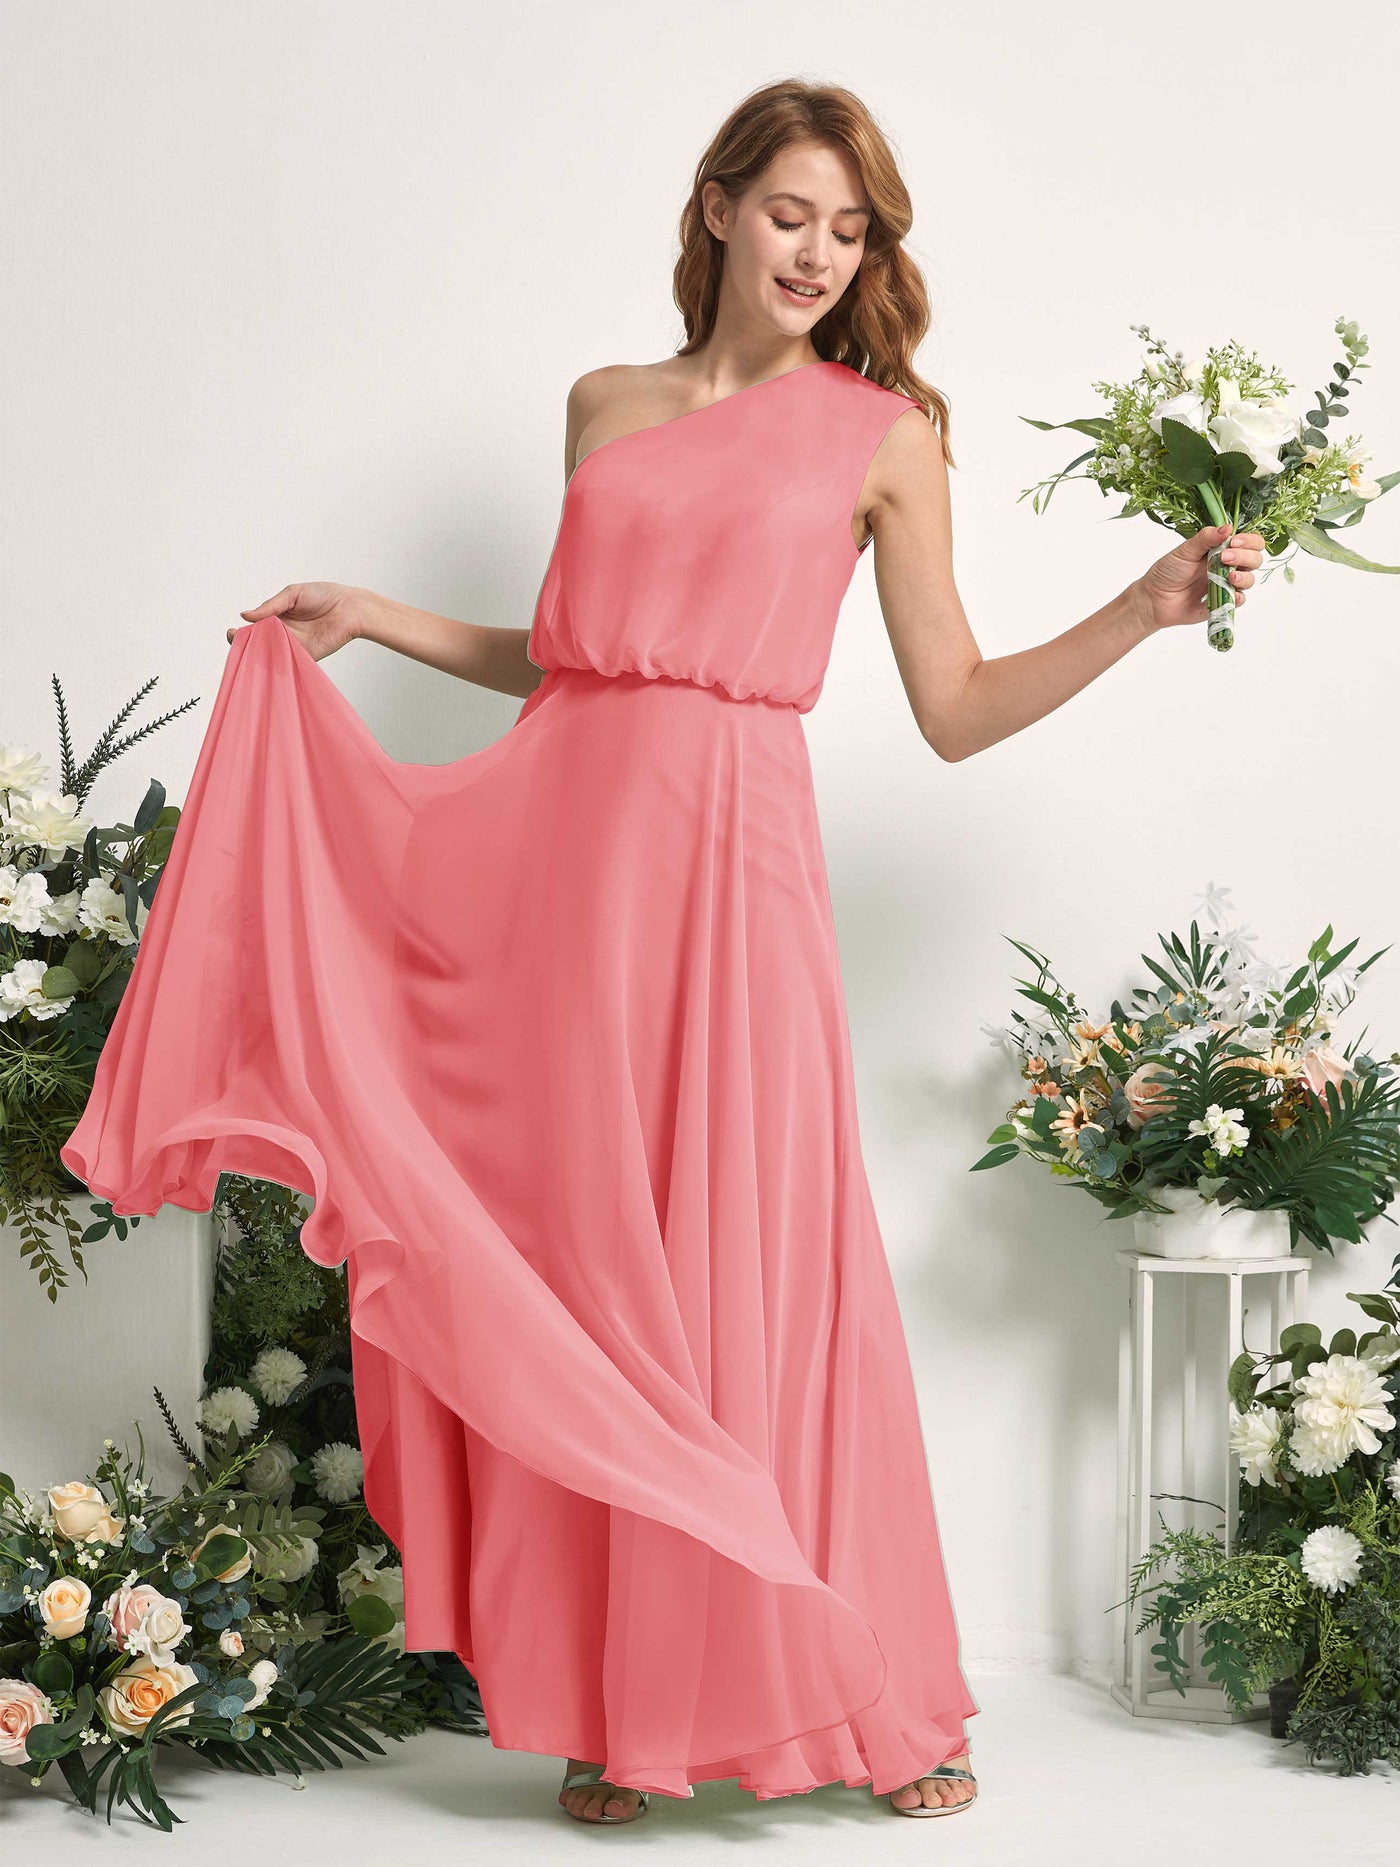 Bridesmaid Dress A-line Chiffon One Shoulder Full Length Sleeveless Wedding Party Dress - Coral Pink (81226830)#color_coral-pink